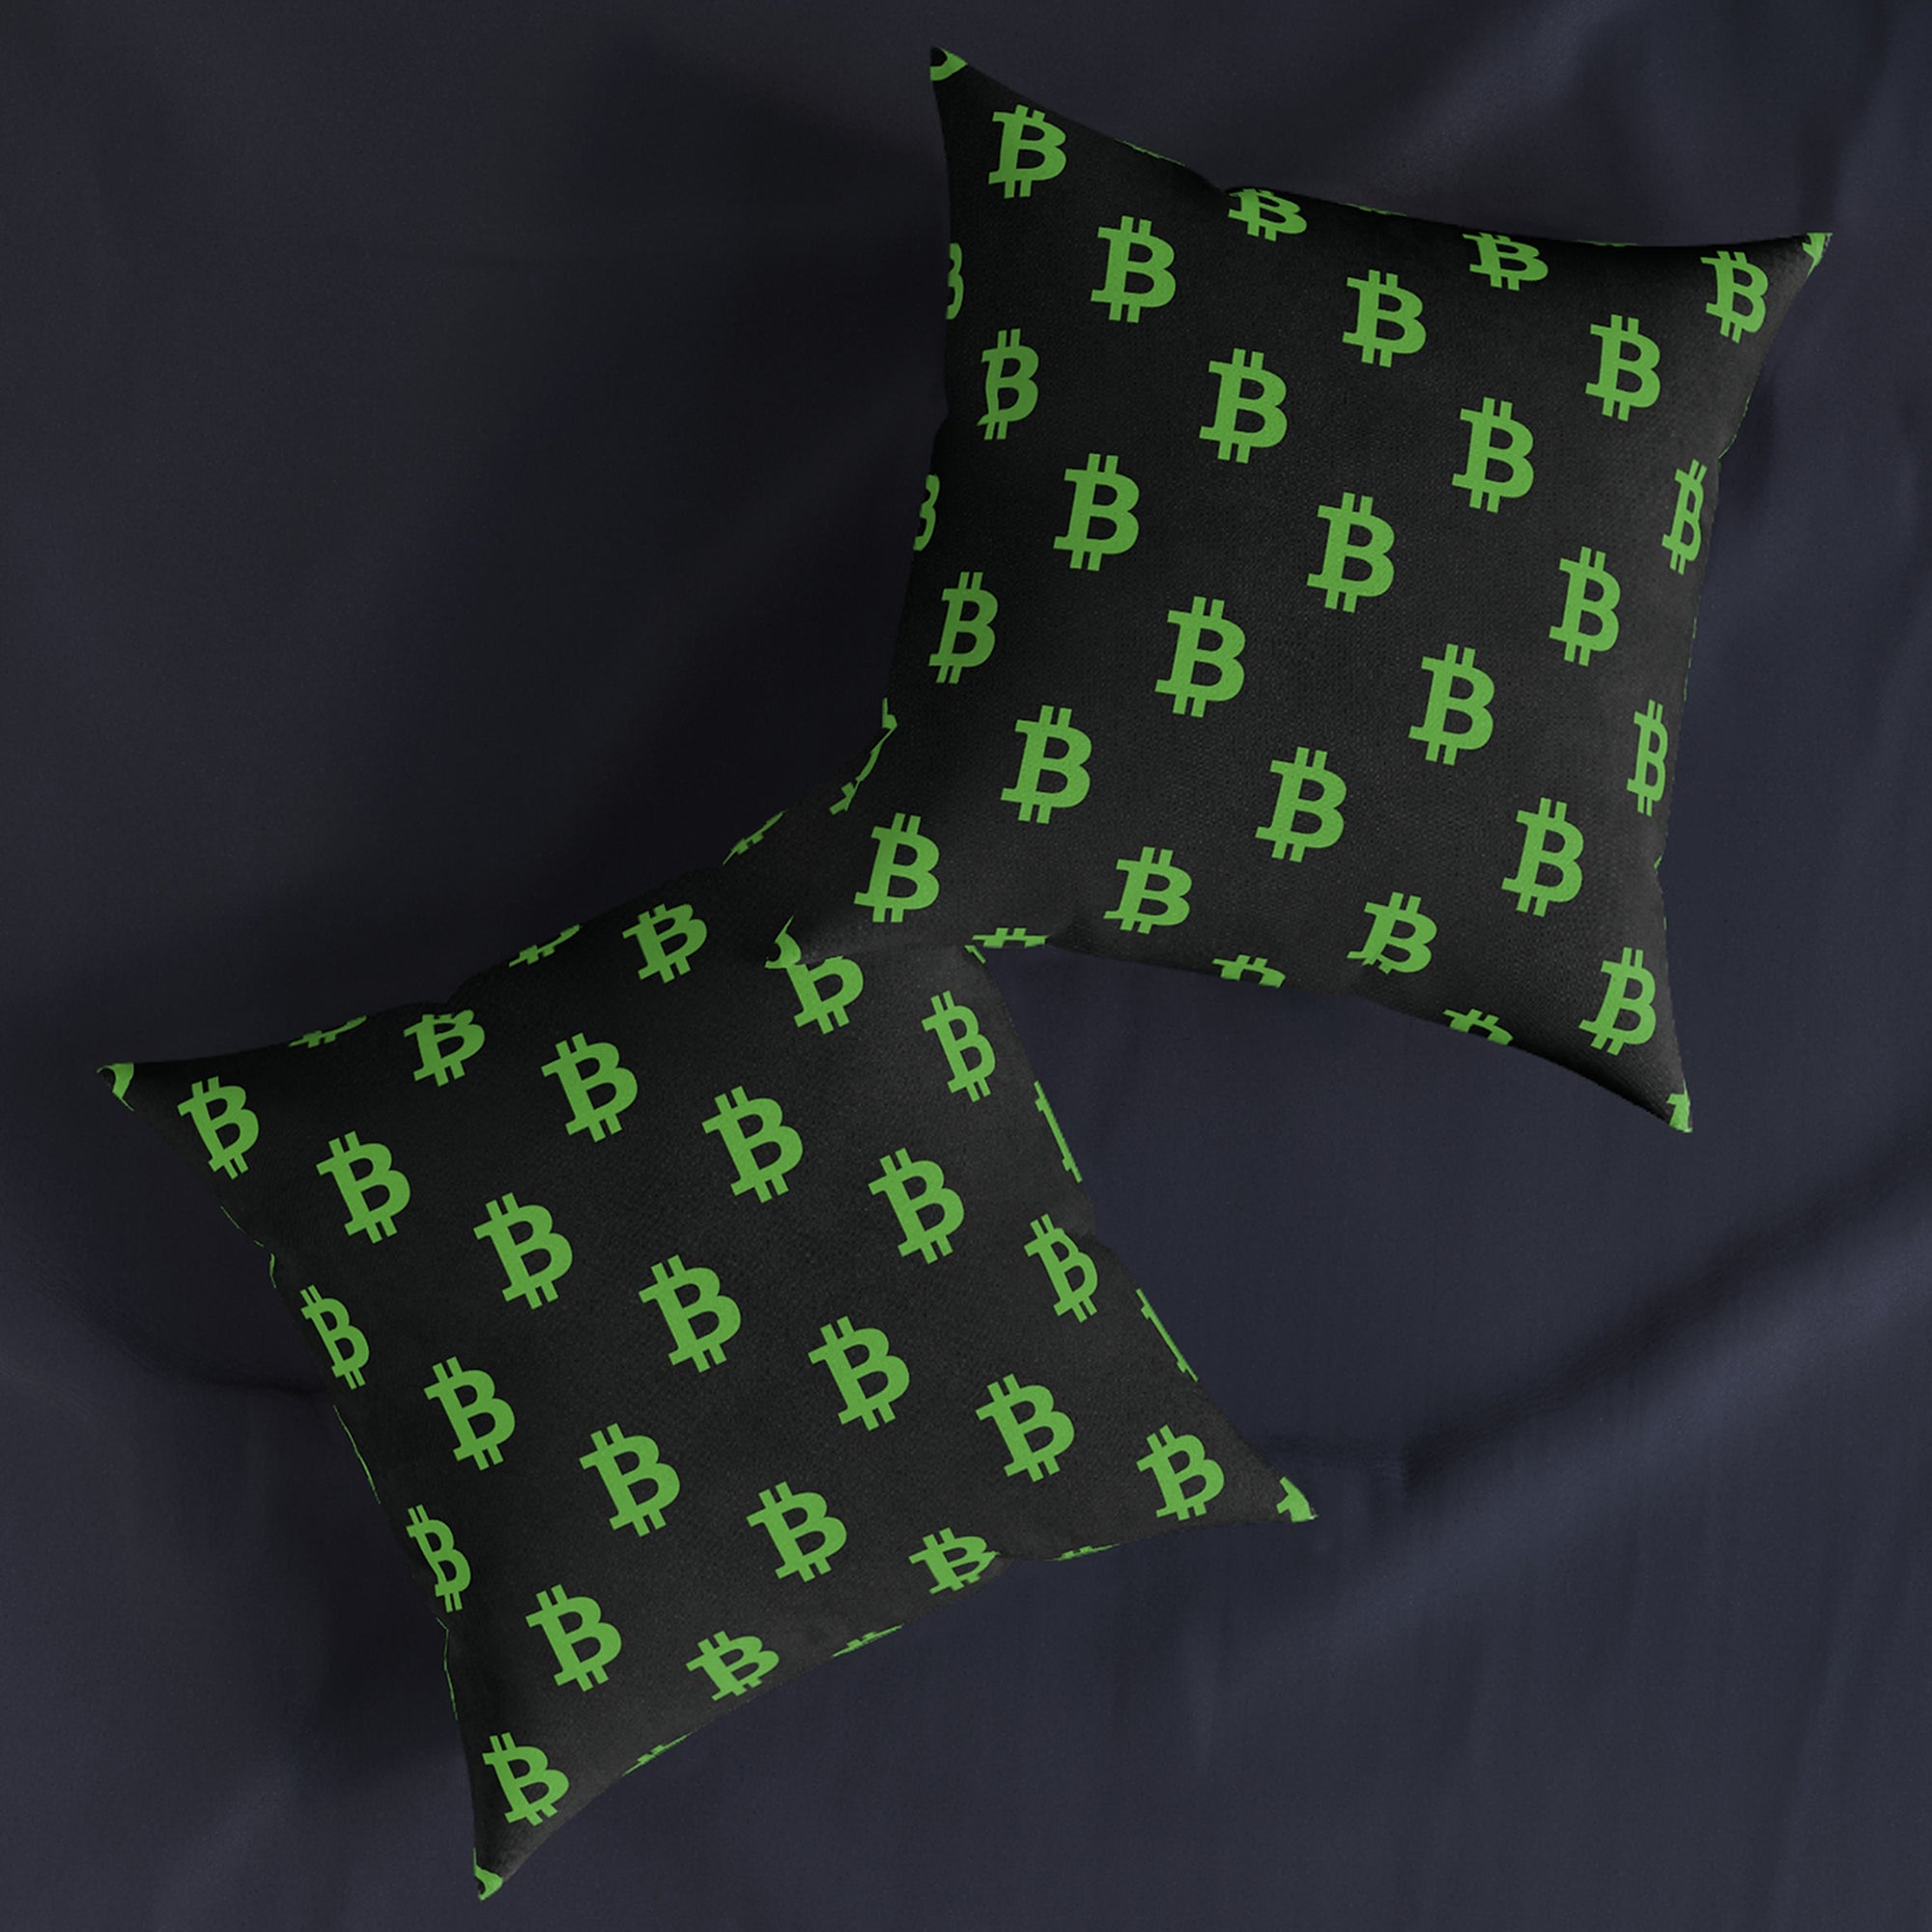 Bitcoin Merch - Bitcoin Pattern Pillow Front and Back View.